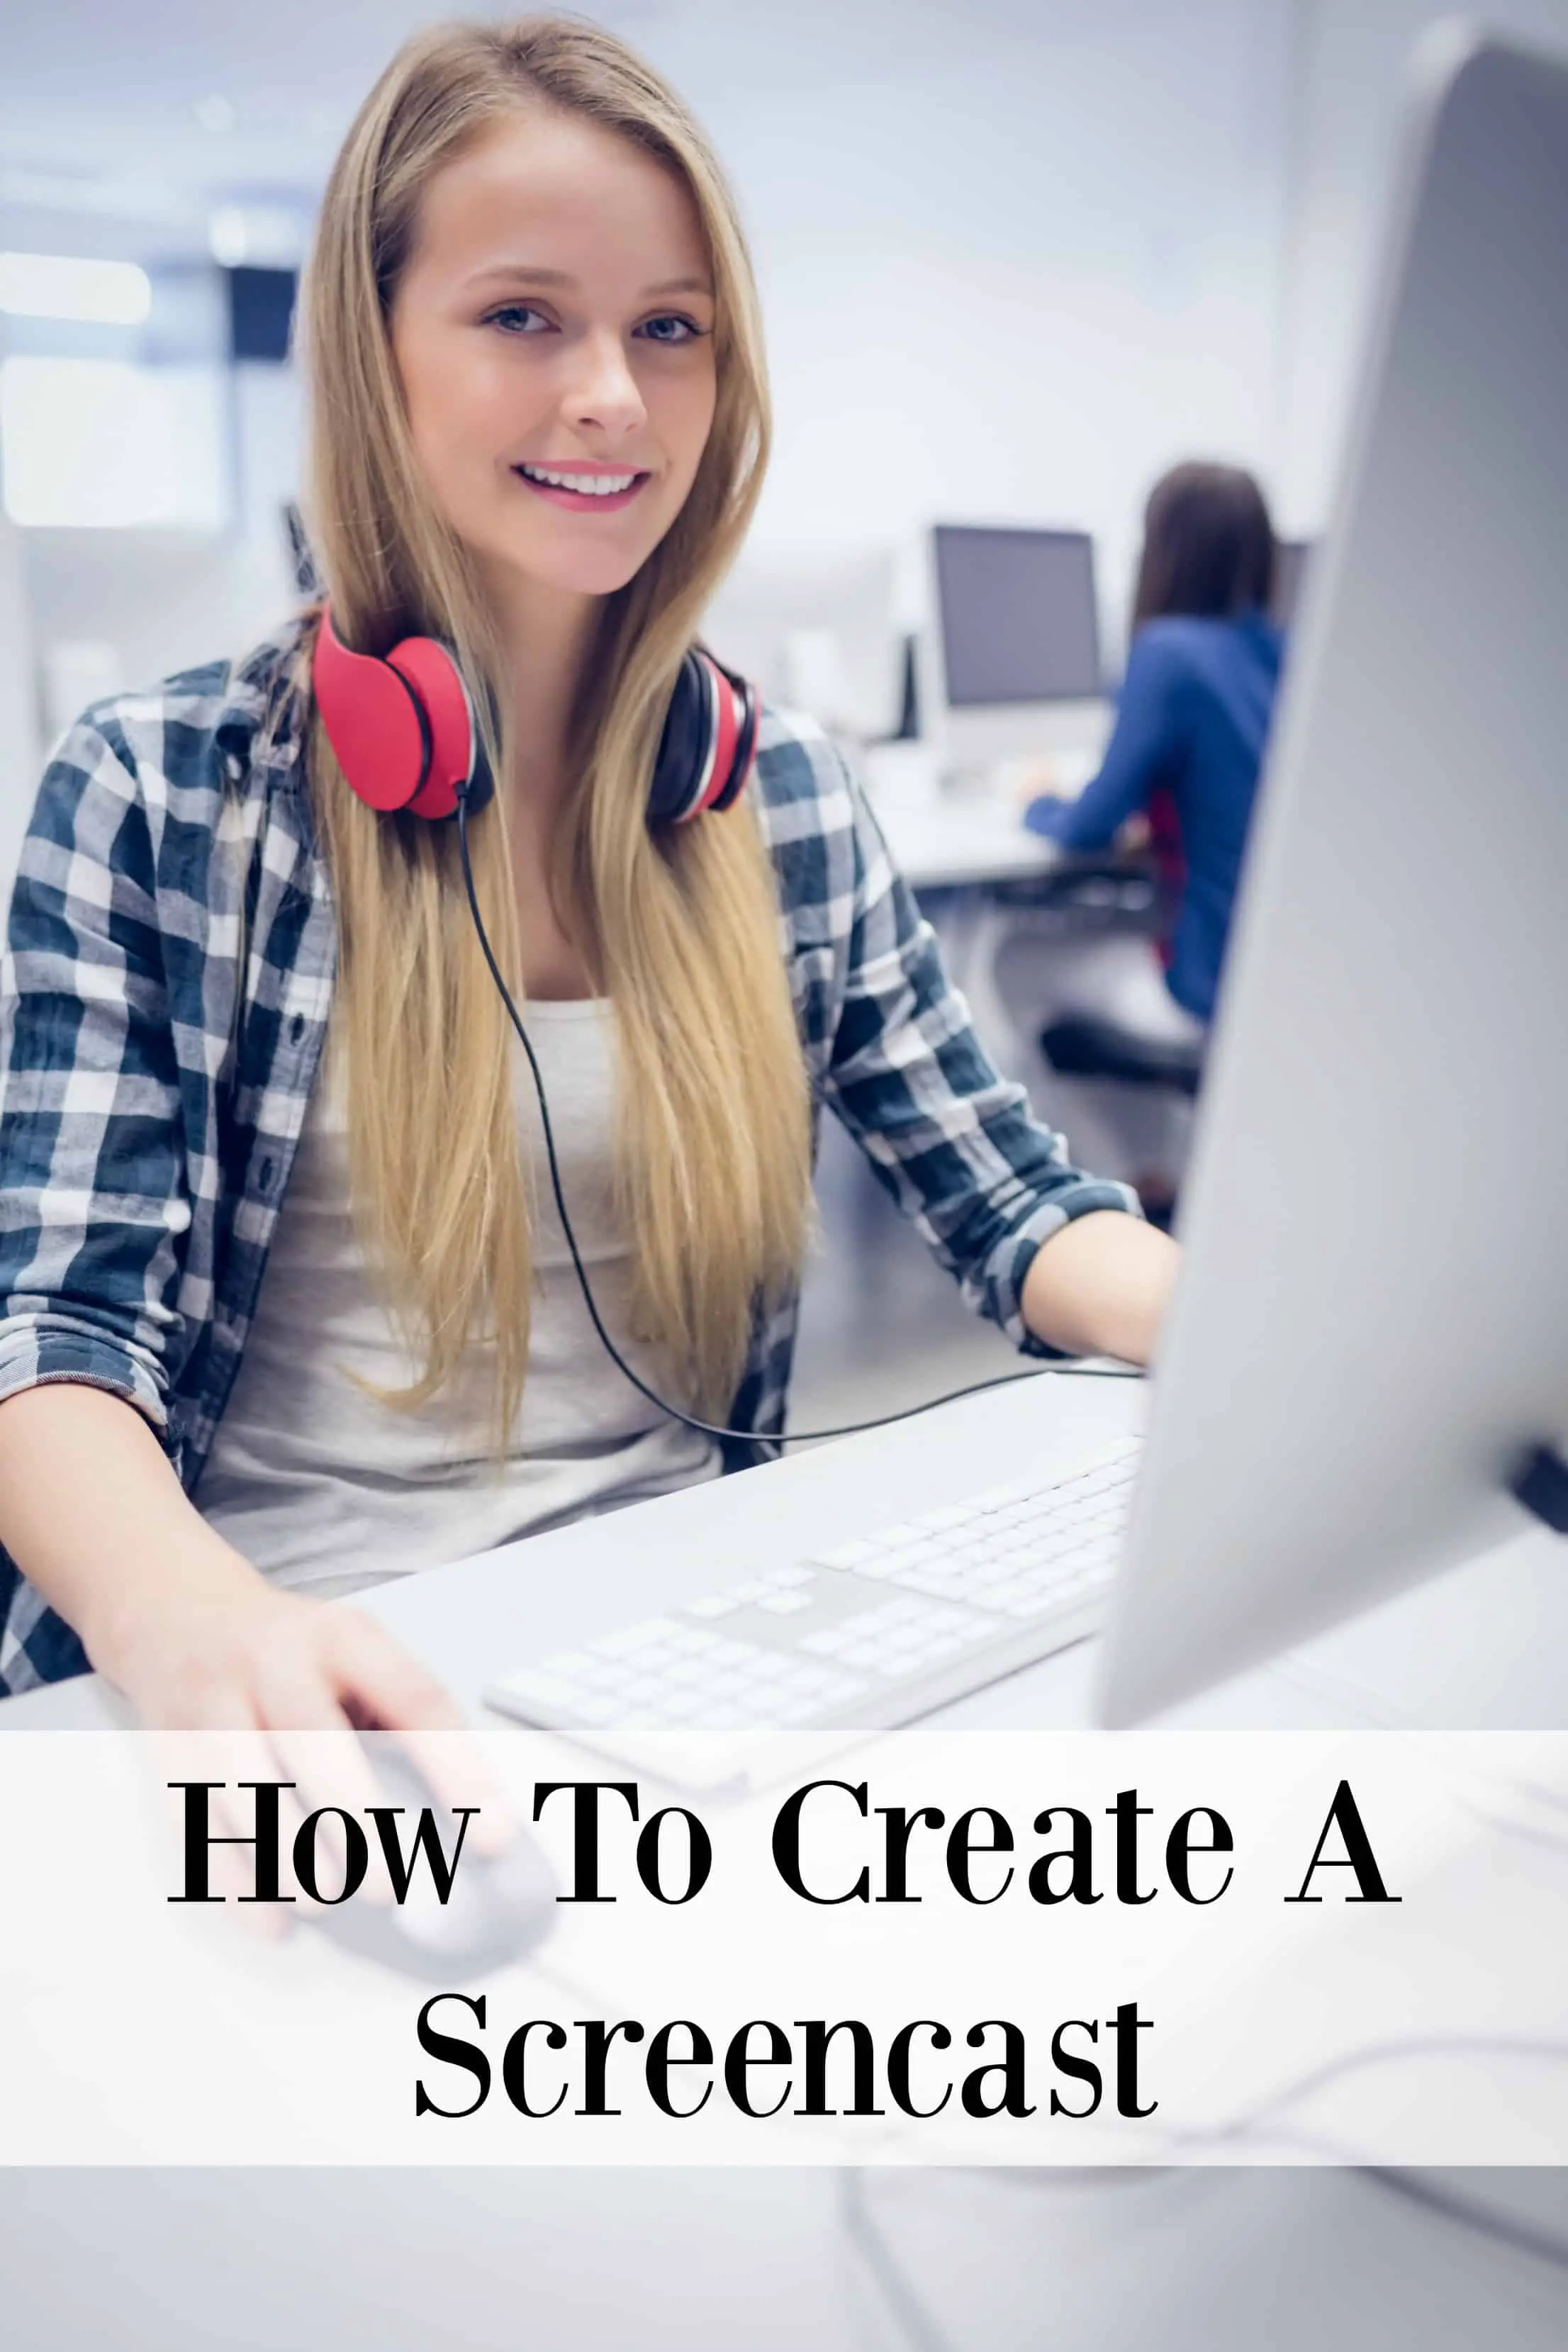 Learn how to create a screencast for your business or ecourse with this simple video tutorial and tips!